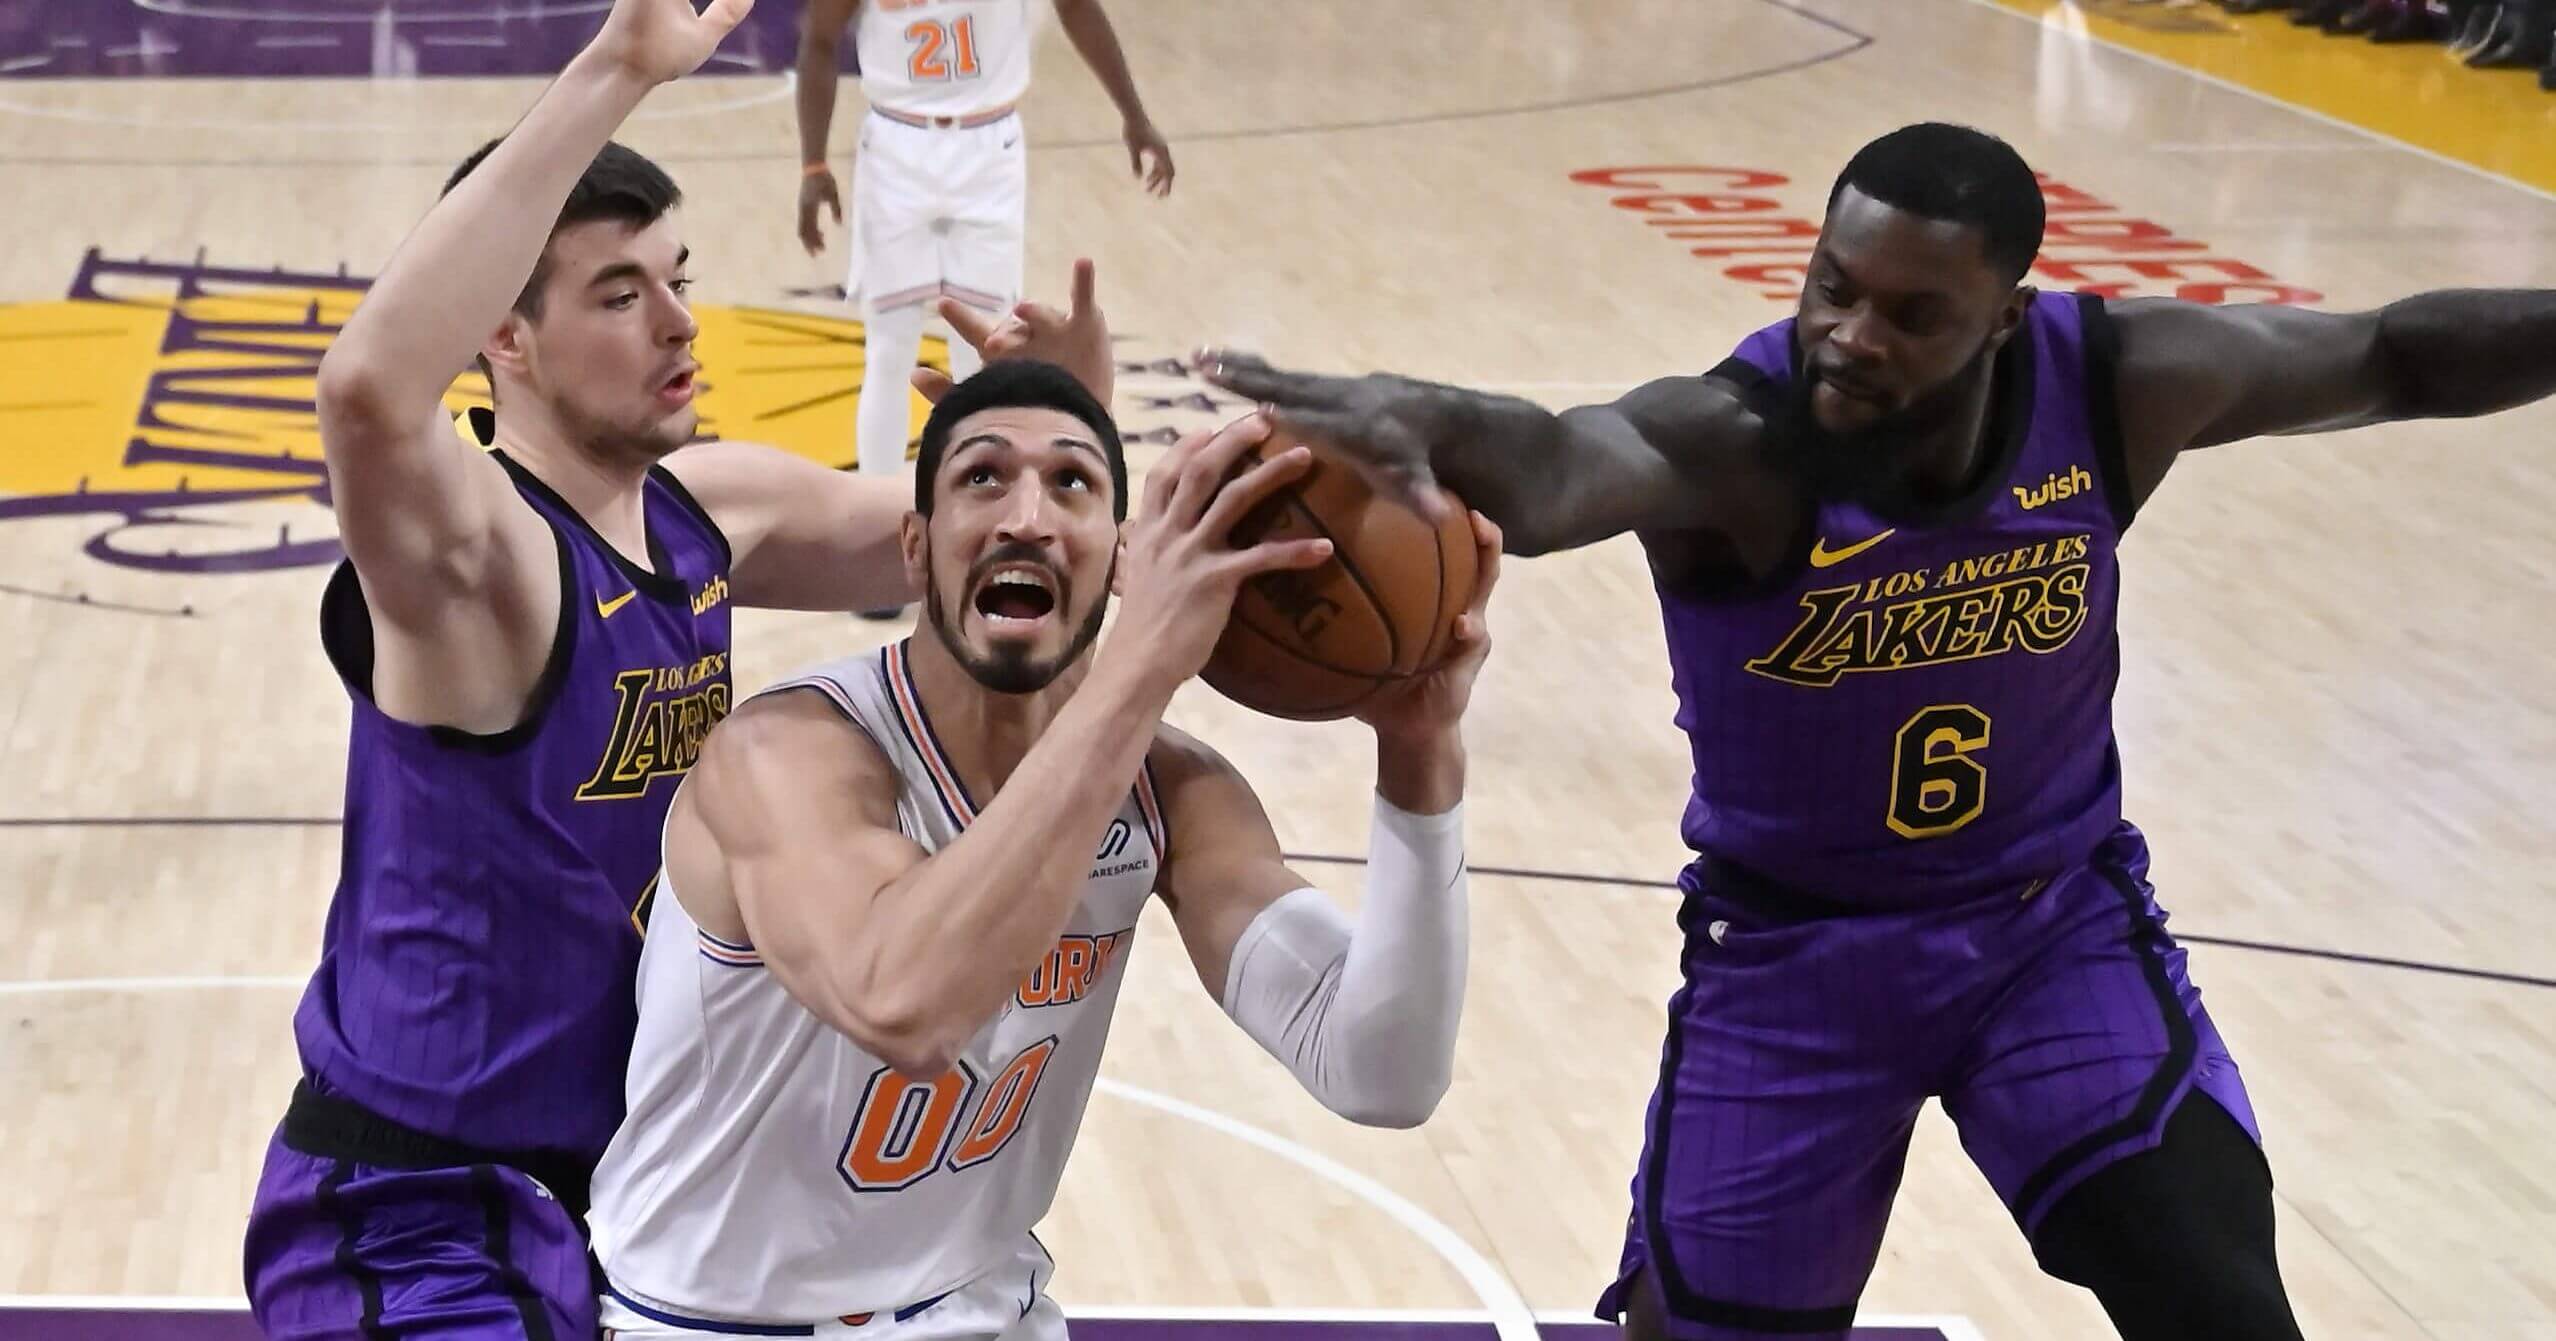 New York Knicks center Enes Kanter tries to shoot during Friday's game against the Lakers in Los Angeles.